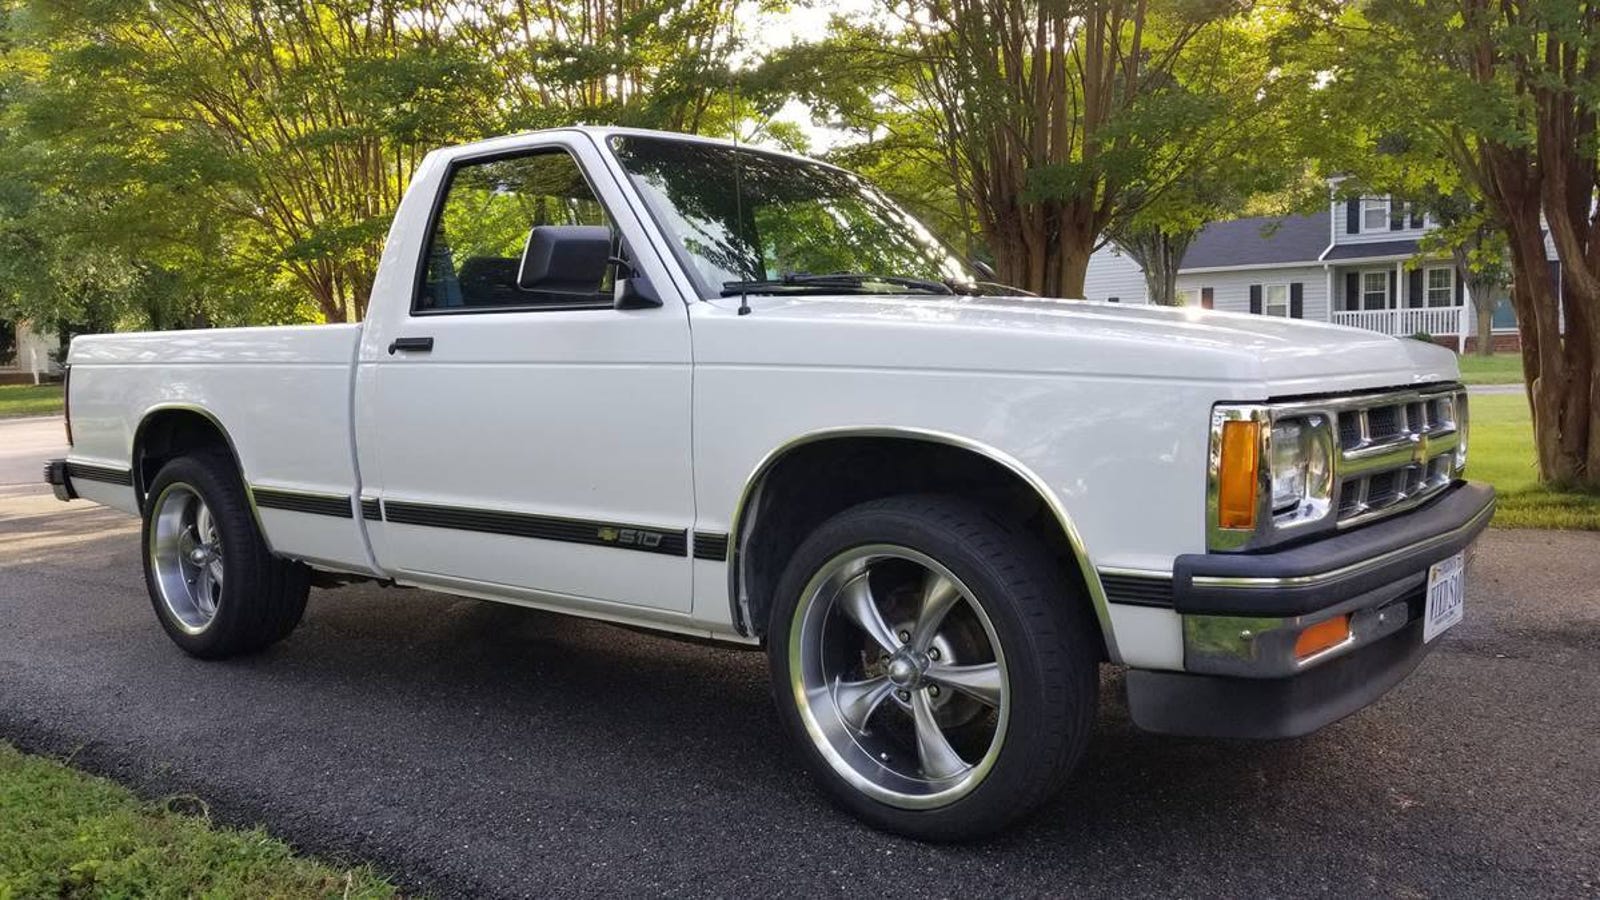 At $8,500, Is This LT1-Powered 1993 Chevy S10 a Pickup ...